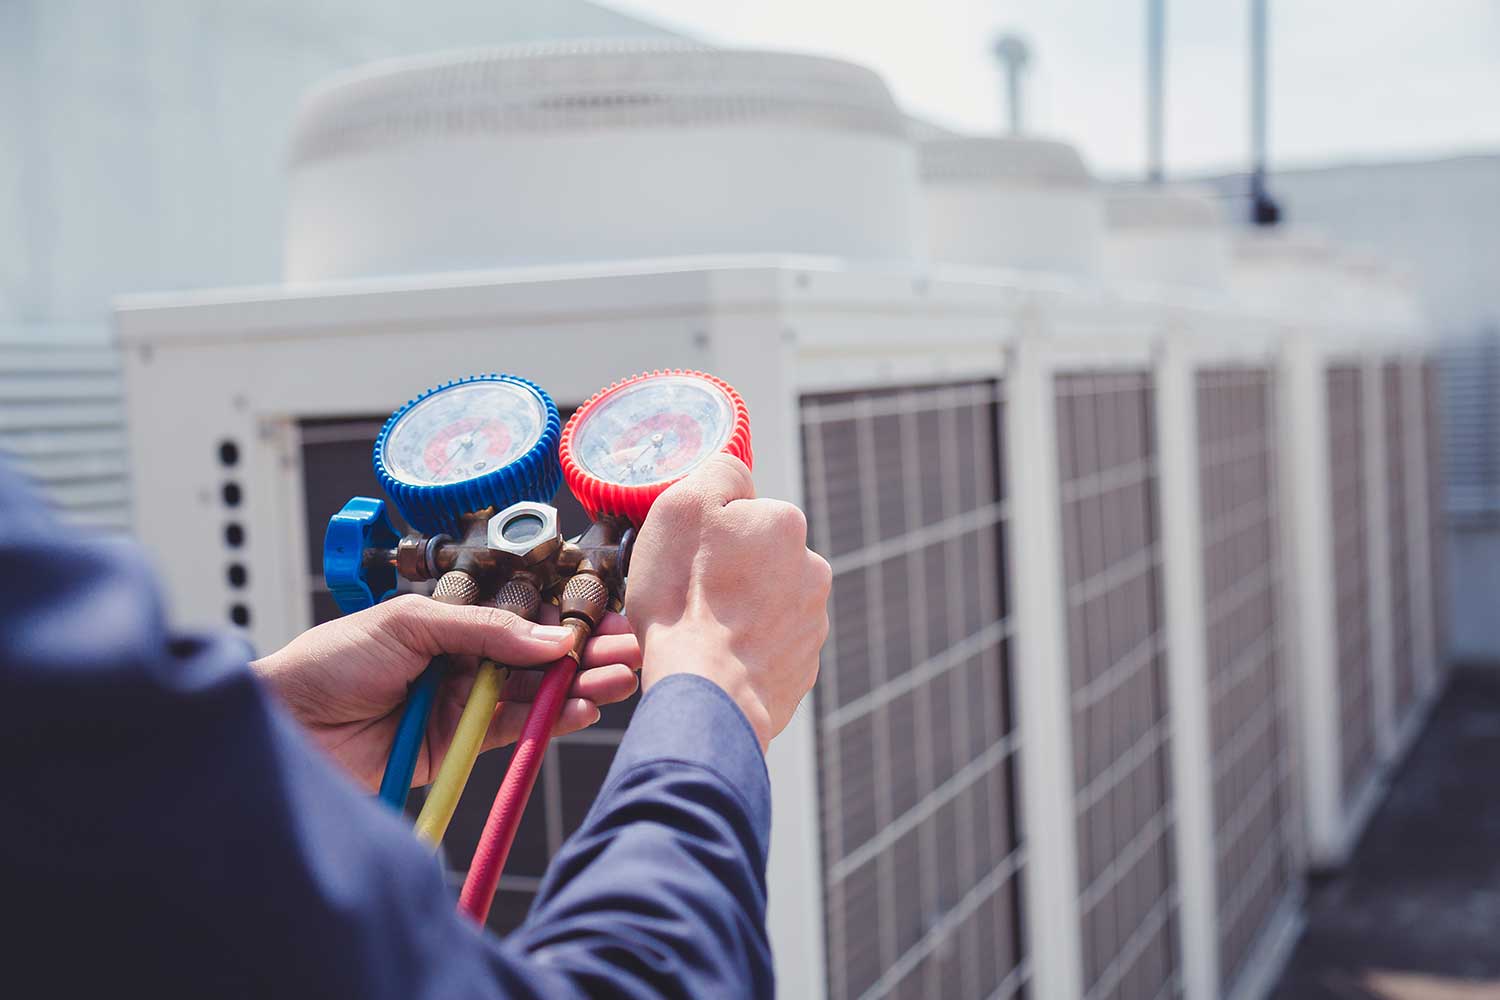 Replacing an Heating and A/C system for saving, efficiency and consistent cooling